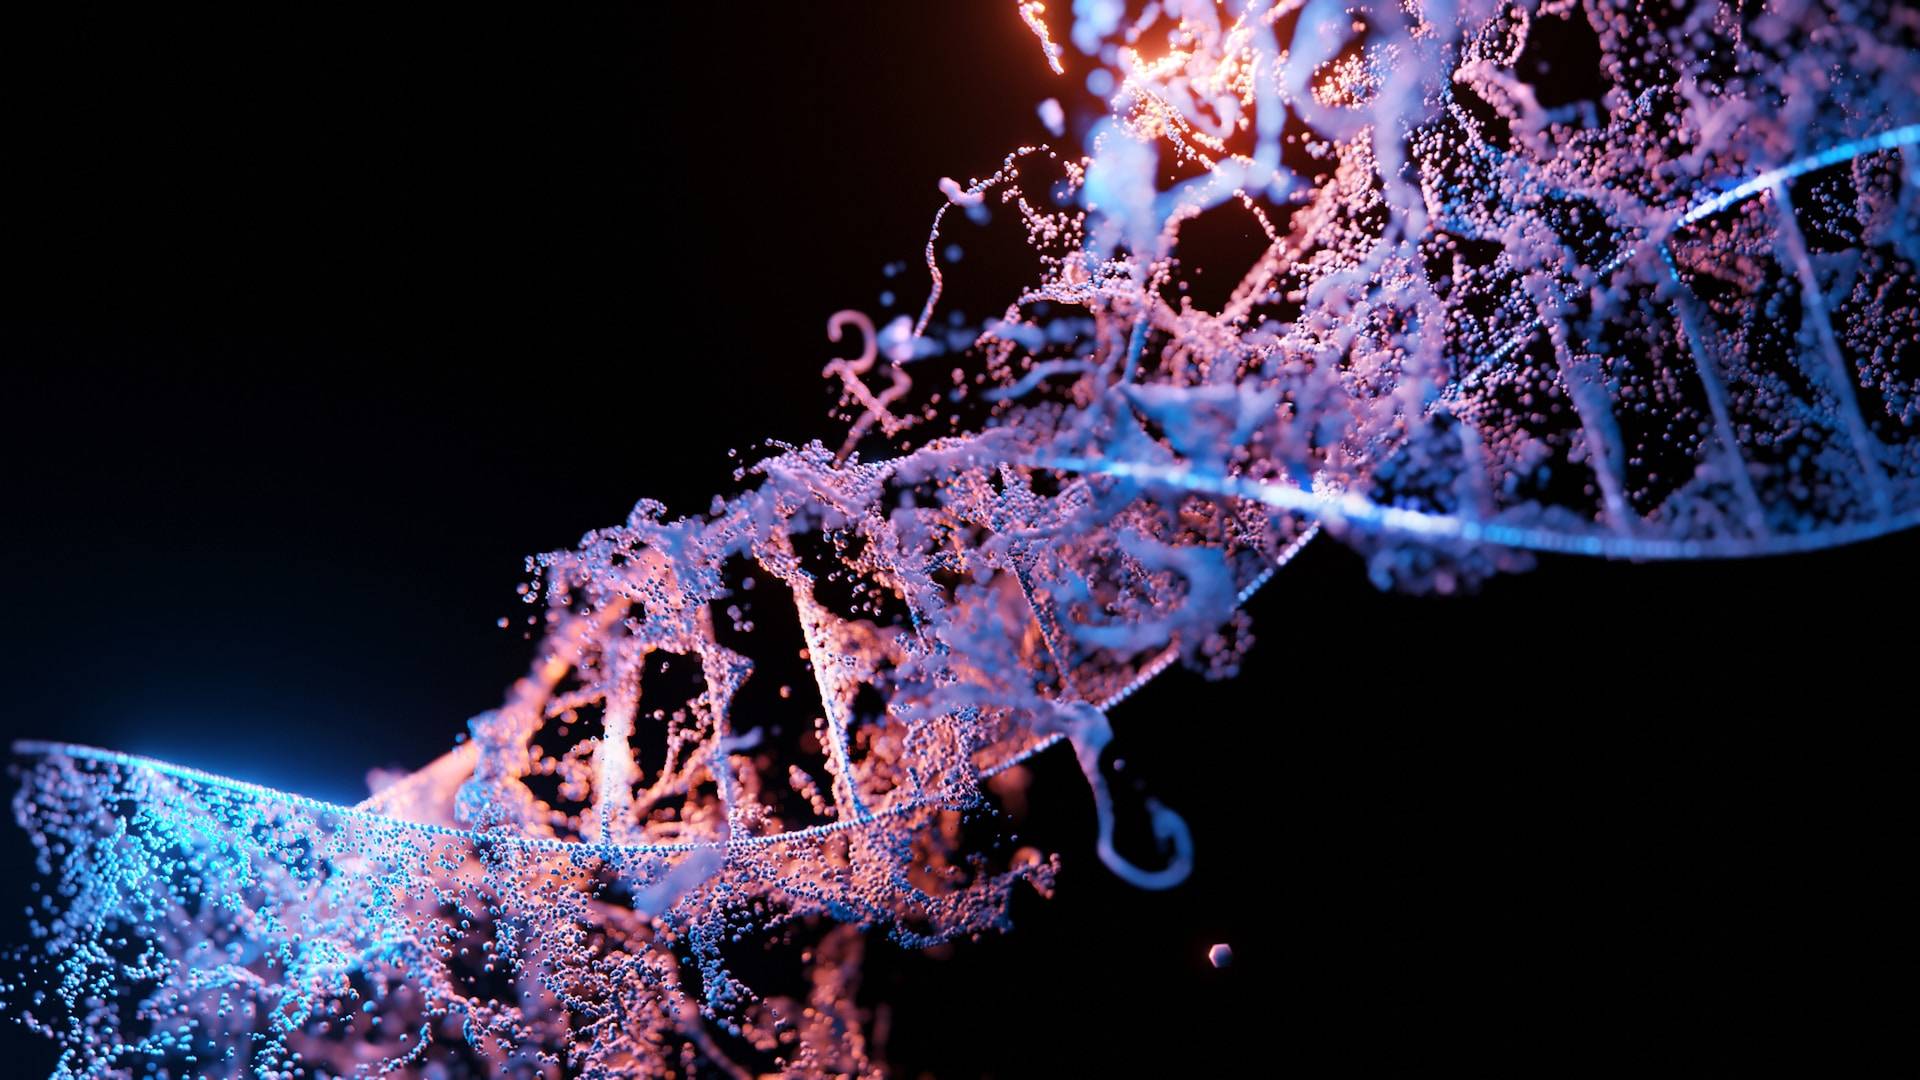 Explore gene editing: Learn about genetics and its uses in healthcare